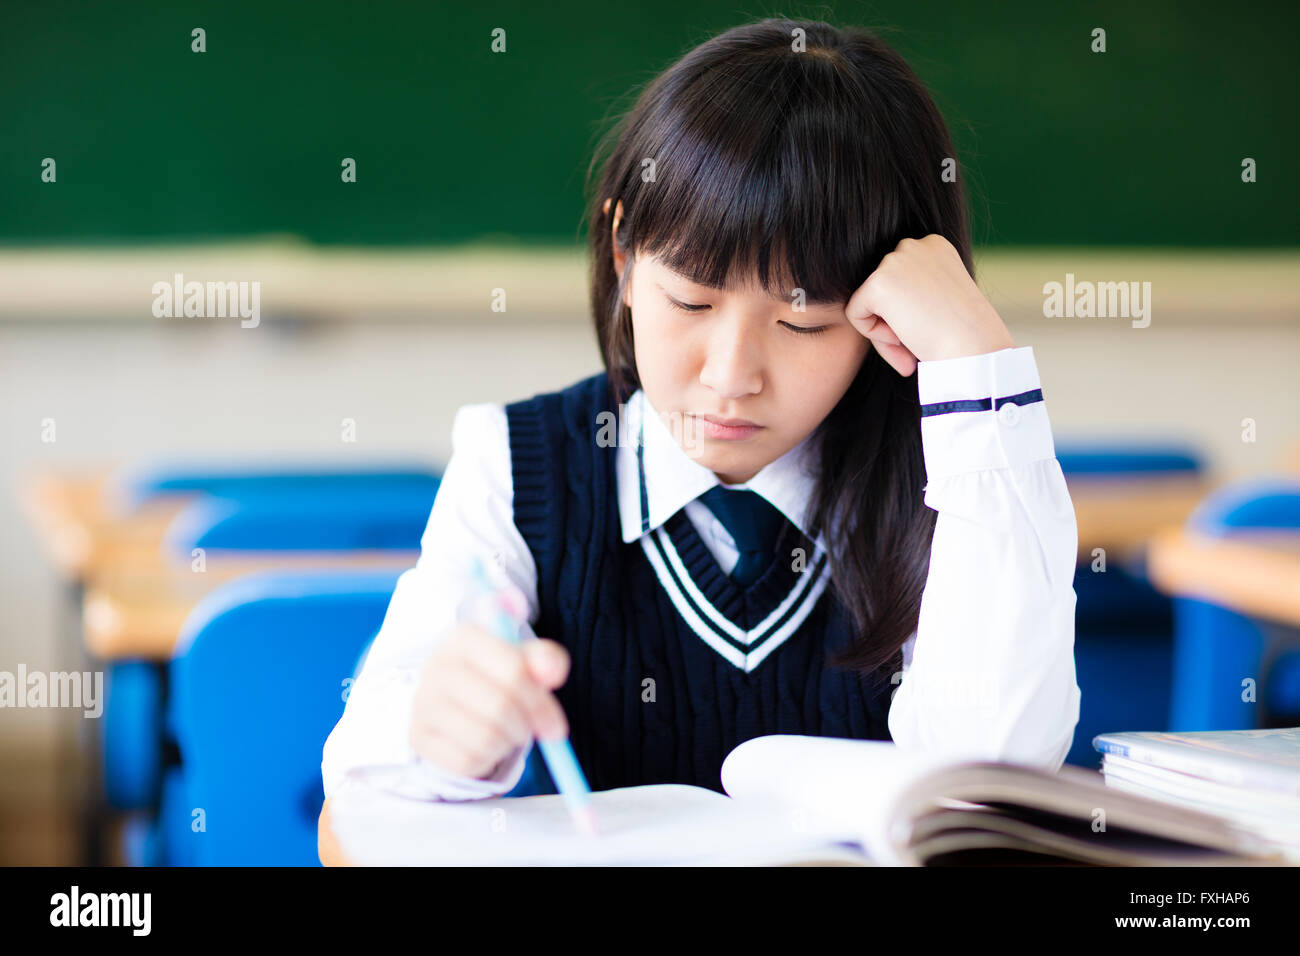 Stressed Student Of High School Sitting in classroom Stock Photo